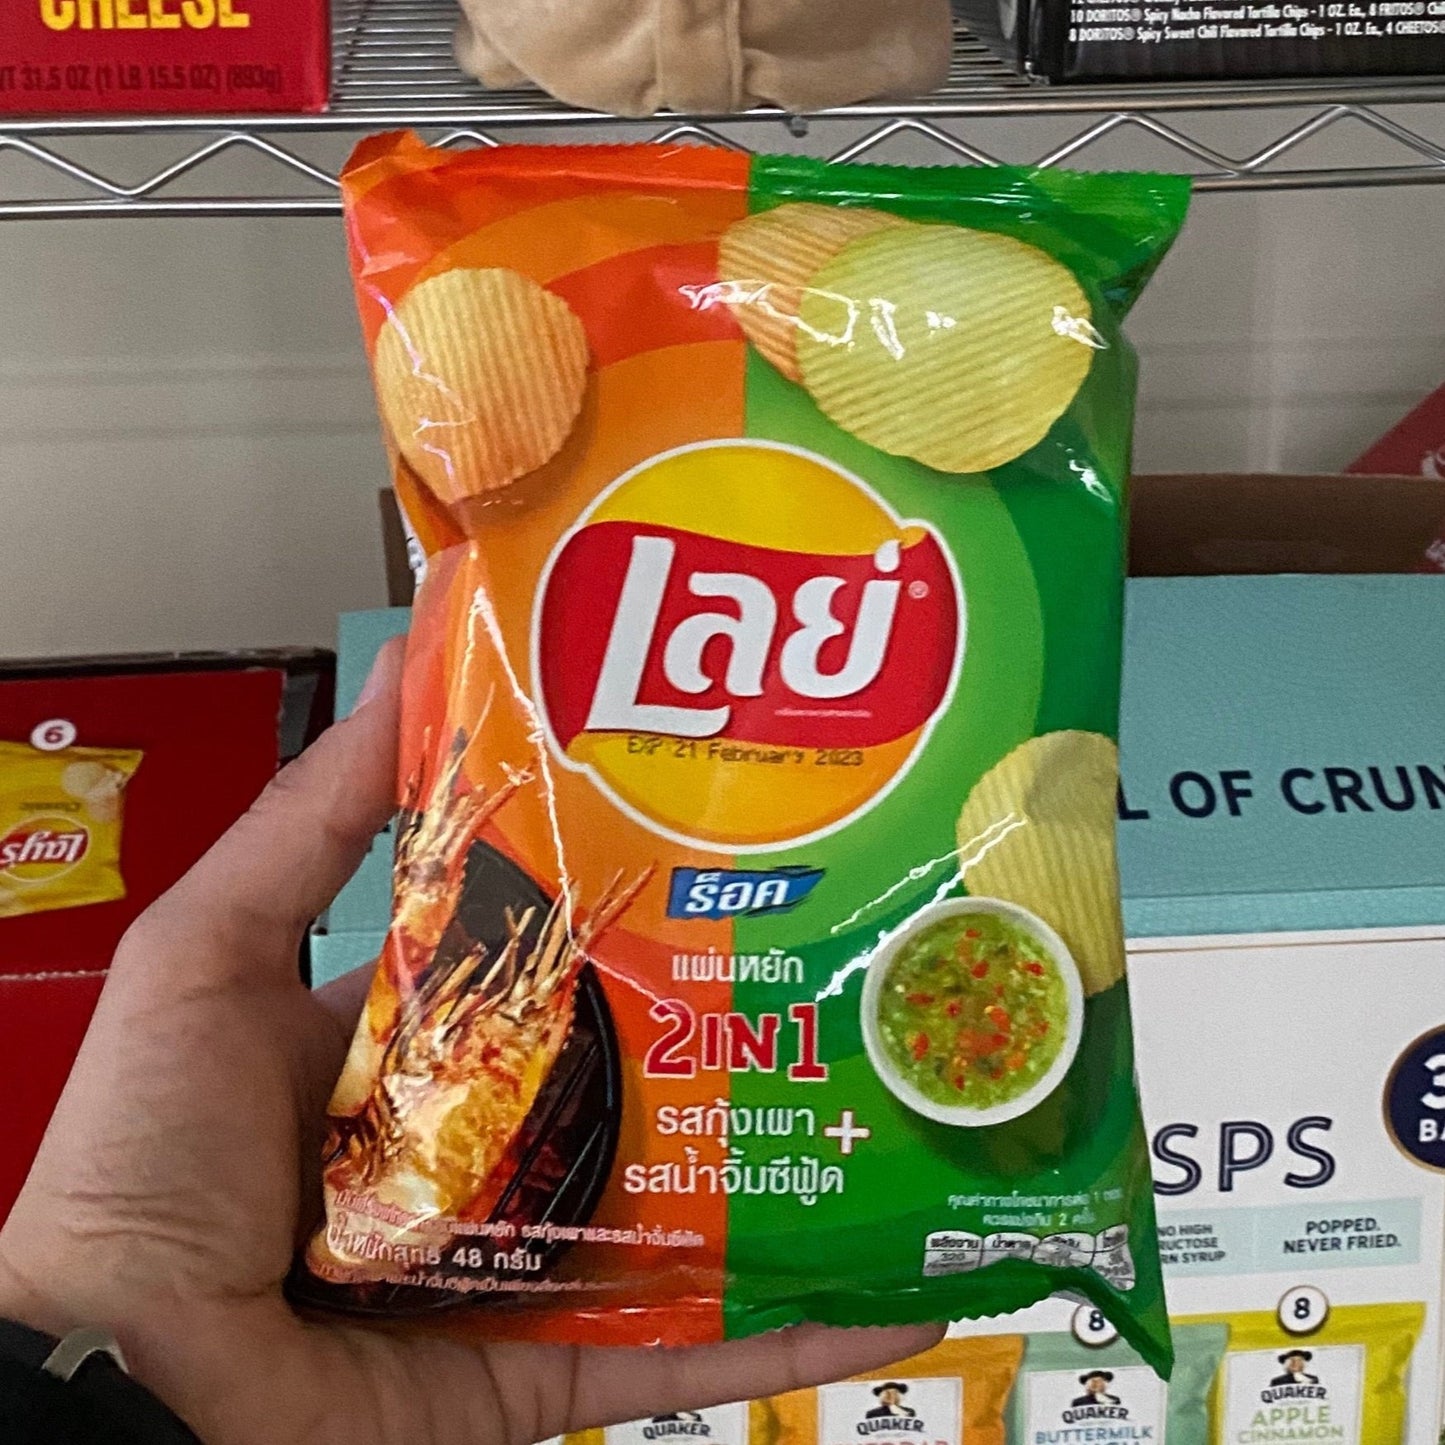 Lay's Grilled Shrimp and Seafood Sauce